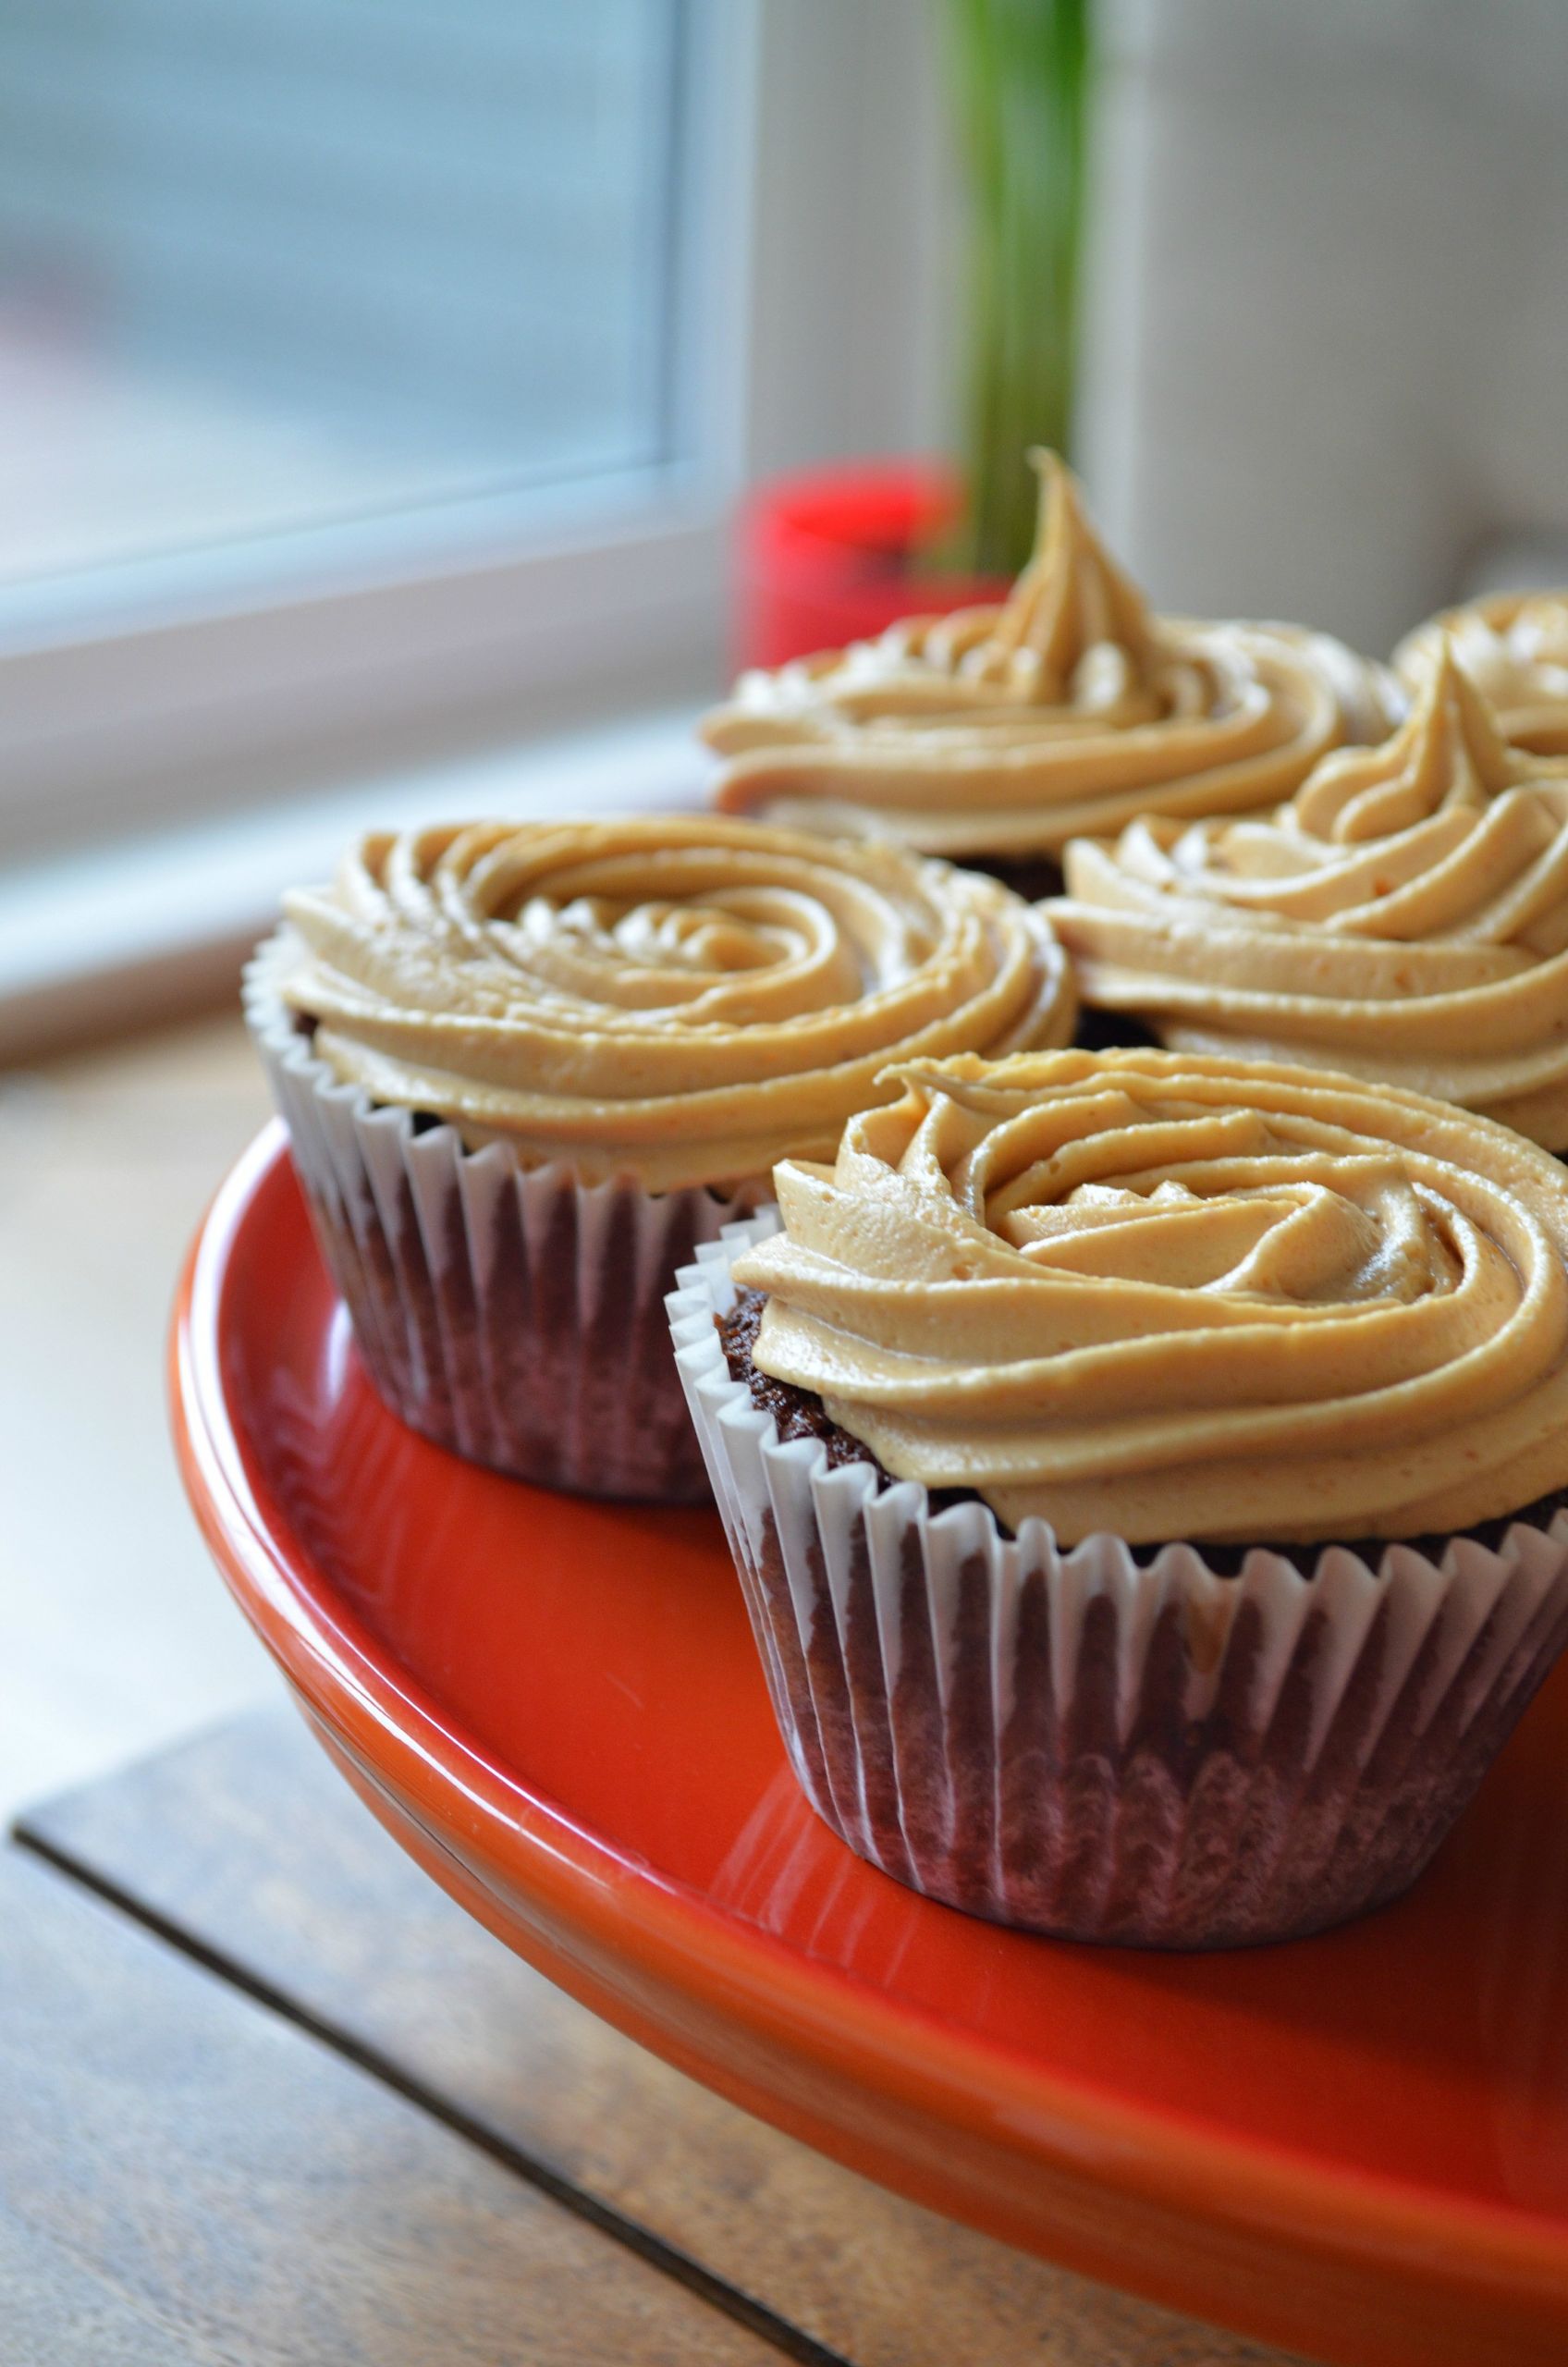 Chocolate Cupcakes With Peanut Butter Frosting
 Chocolate Cupcakes with Peanut Butter Frosting Video